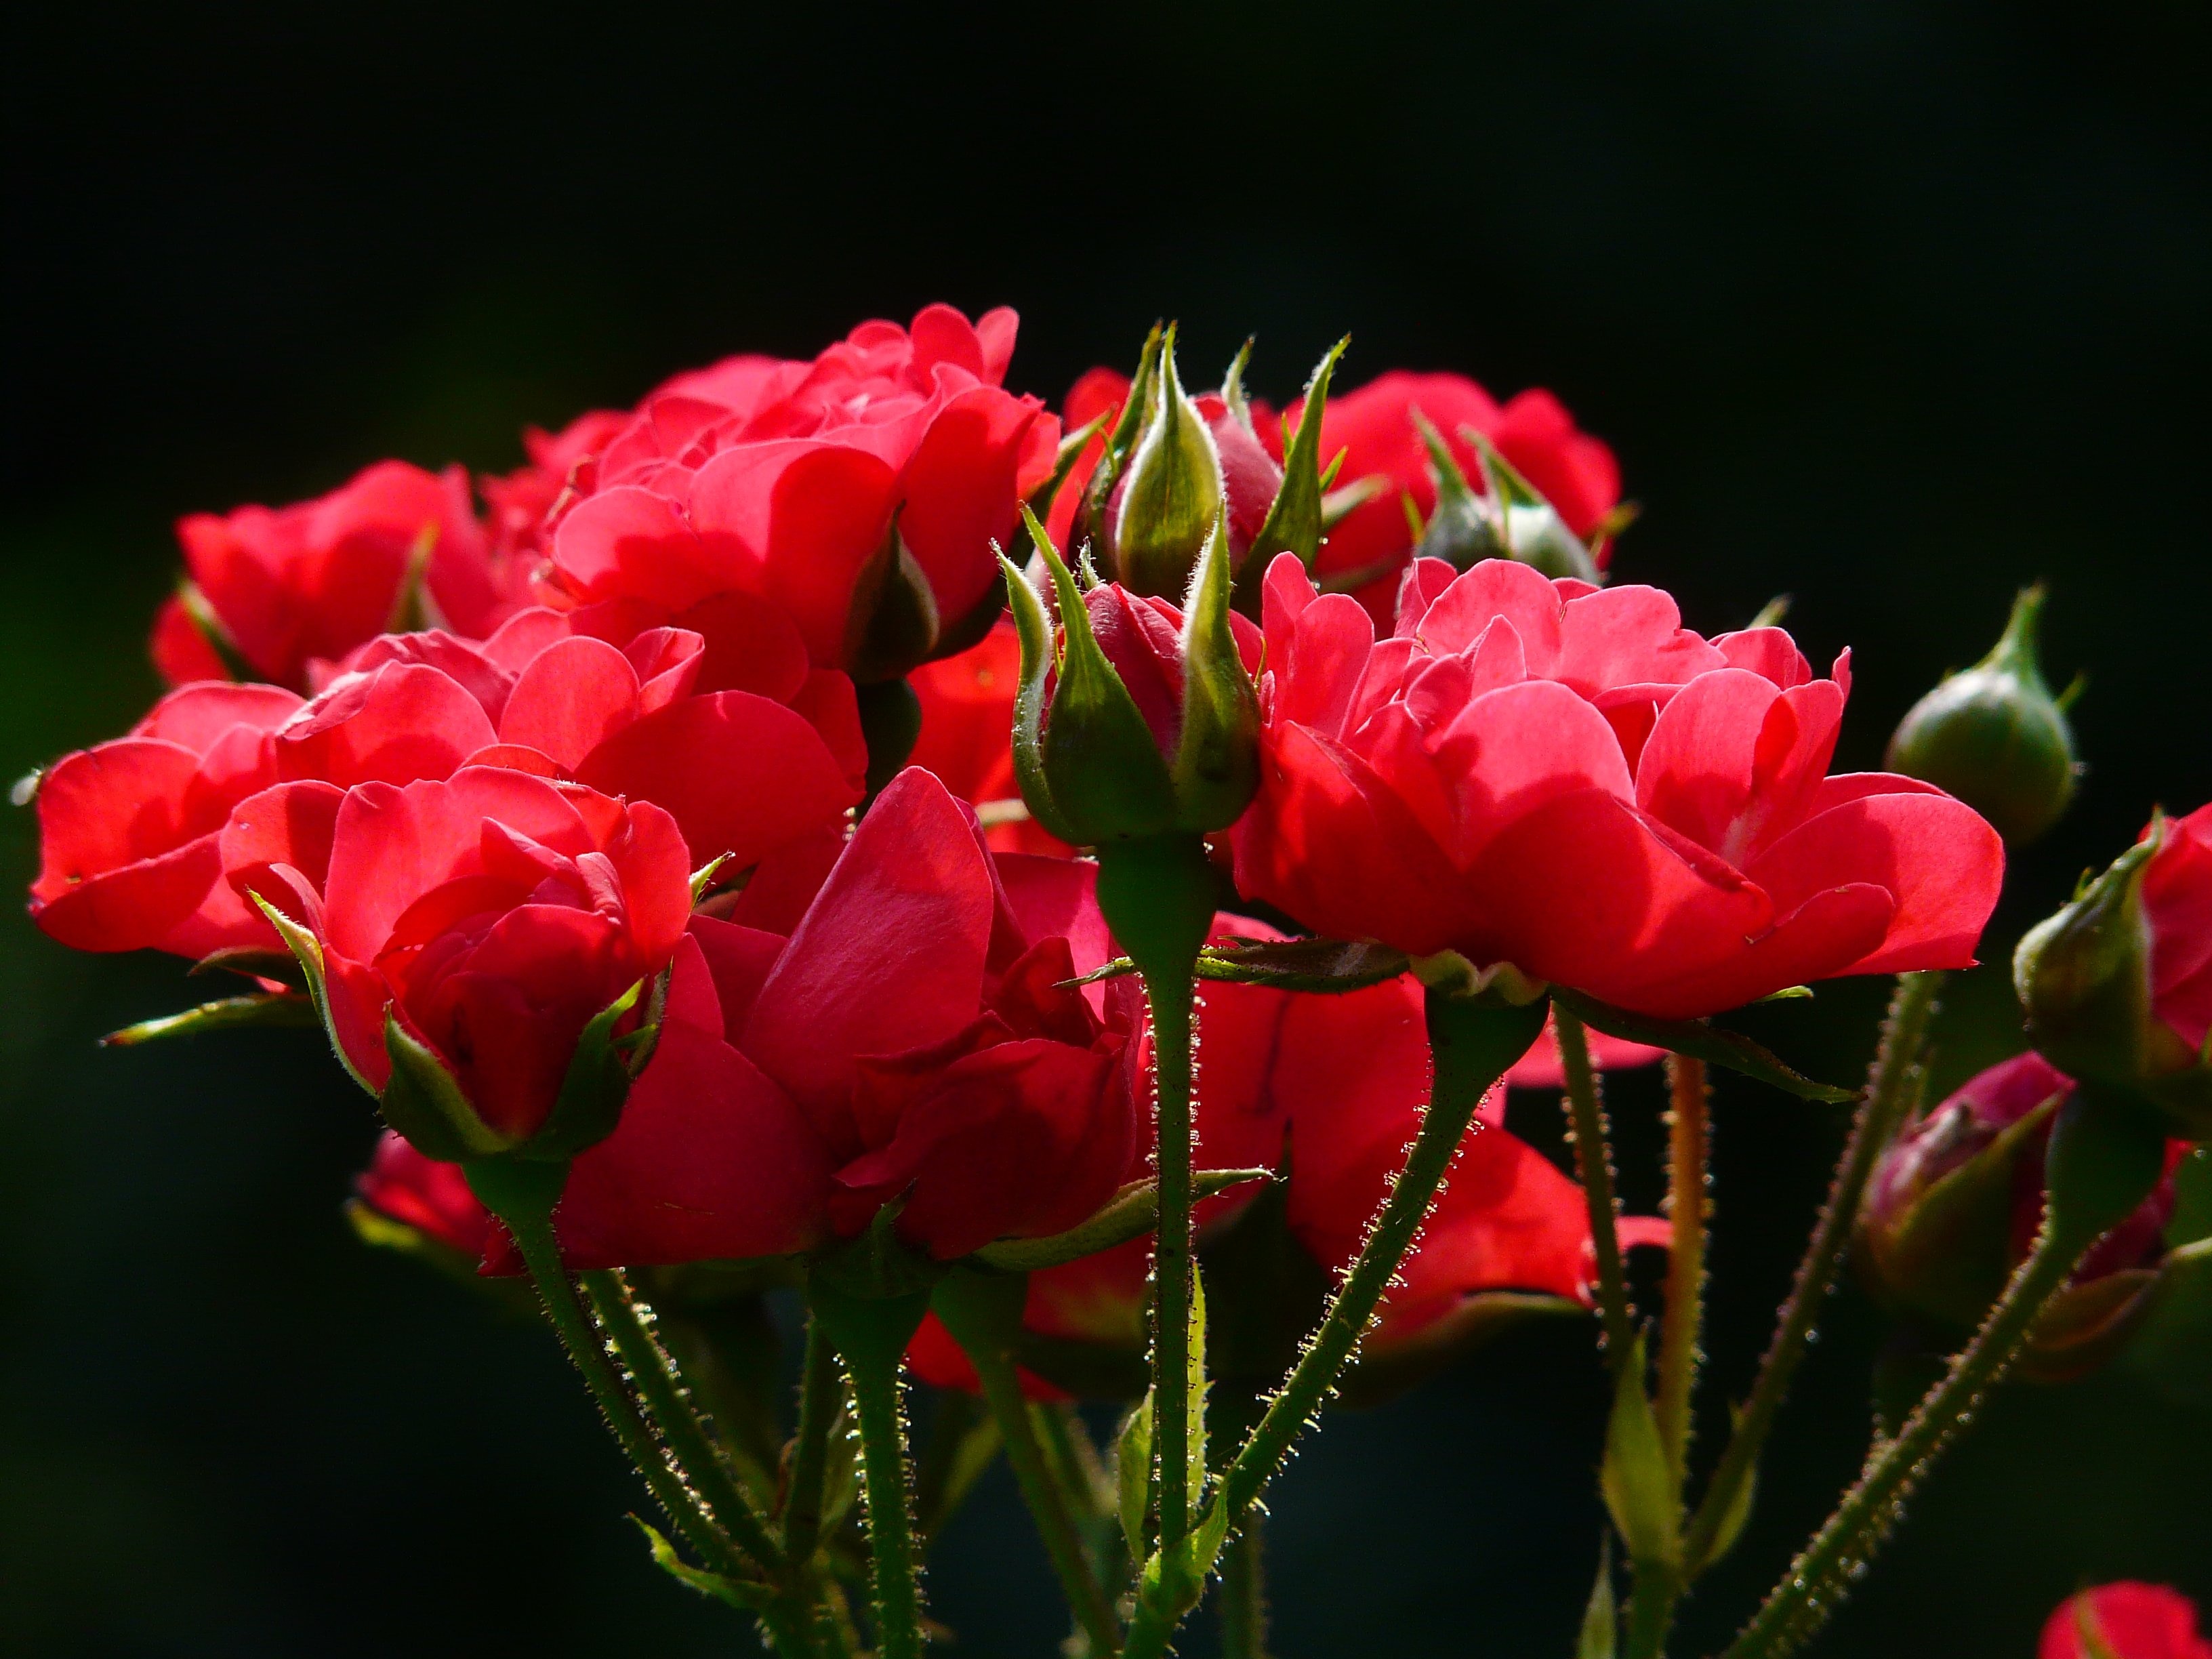 shallow photo of red flower